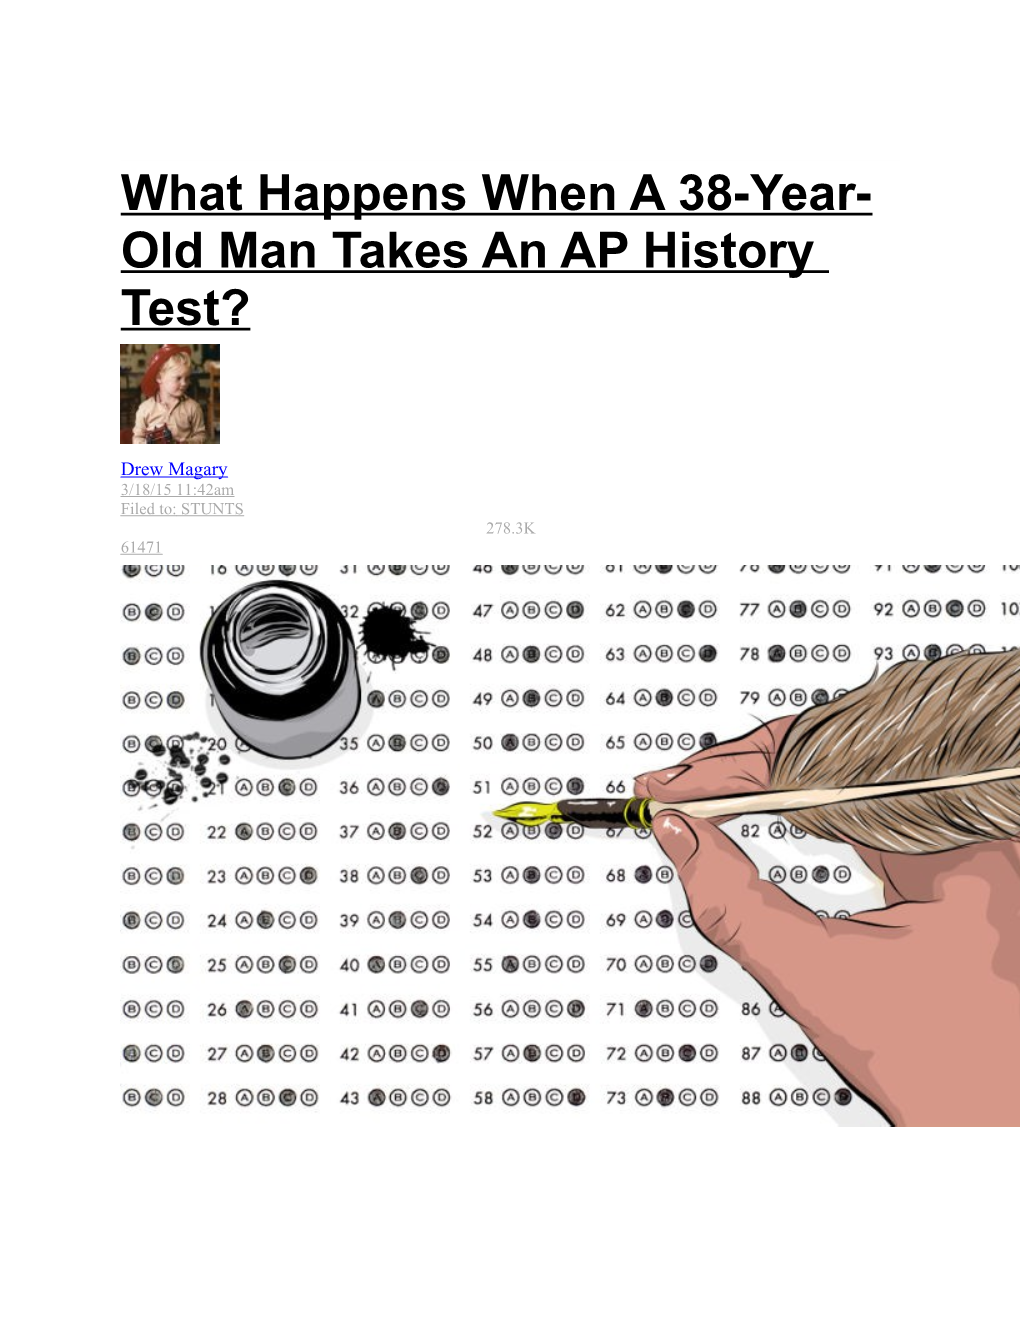 What Happens When a 38-Year-Old Man Takes an AP History Test?